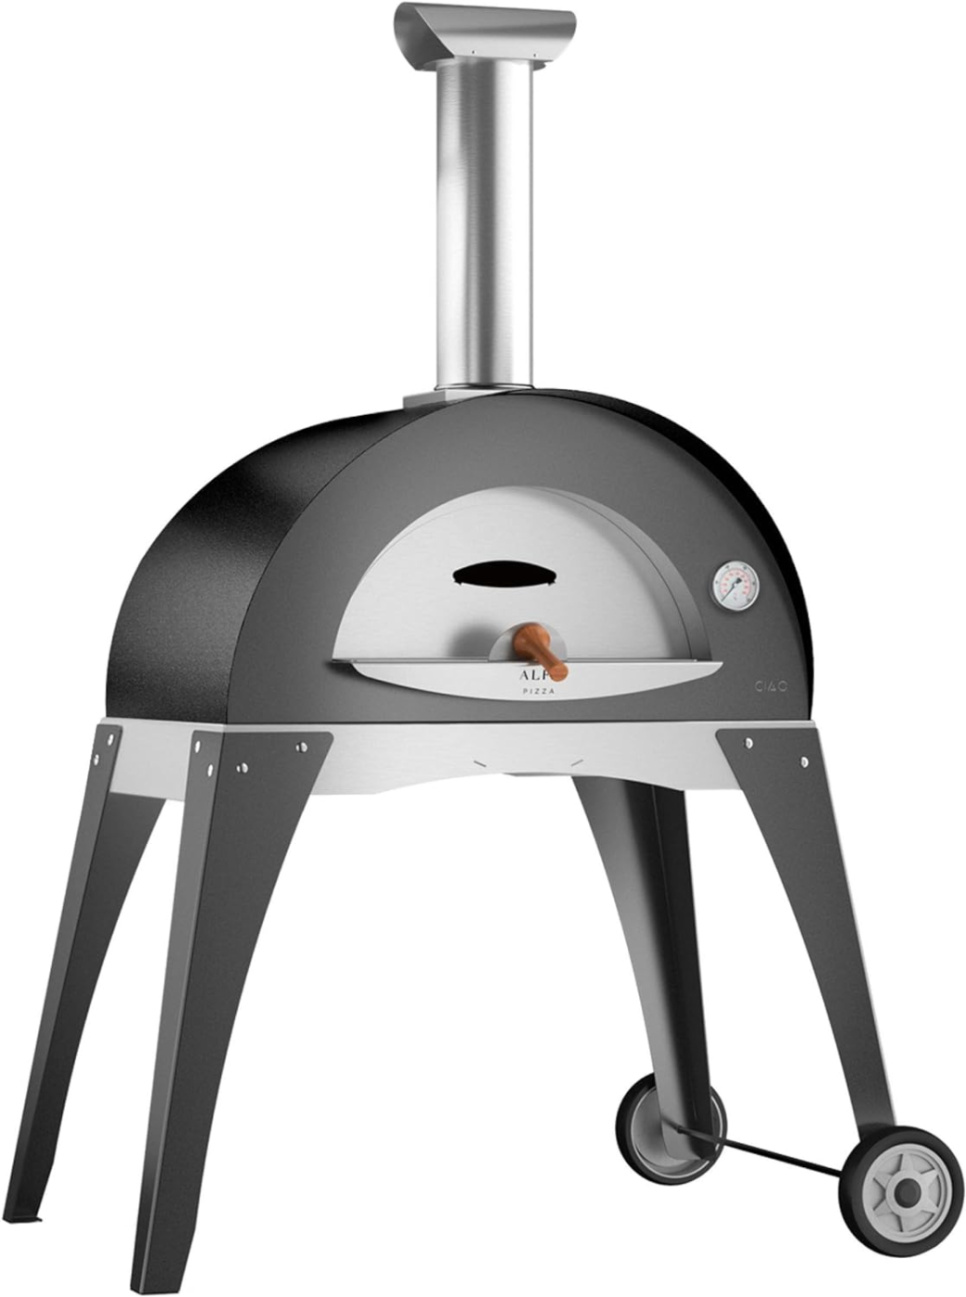 Pizza oven, wood-burning, Ciao - Alfa Forni - Grey, Oven and base in the group Barbecues, Stoves & Ovens / Ovens / Pizza ovens at KitchenLab (1590-23274)